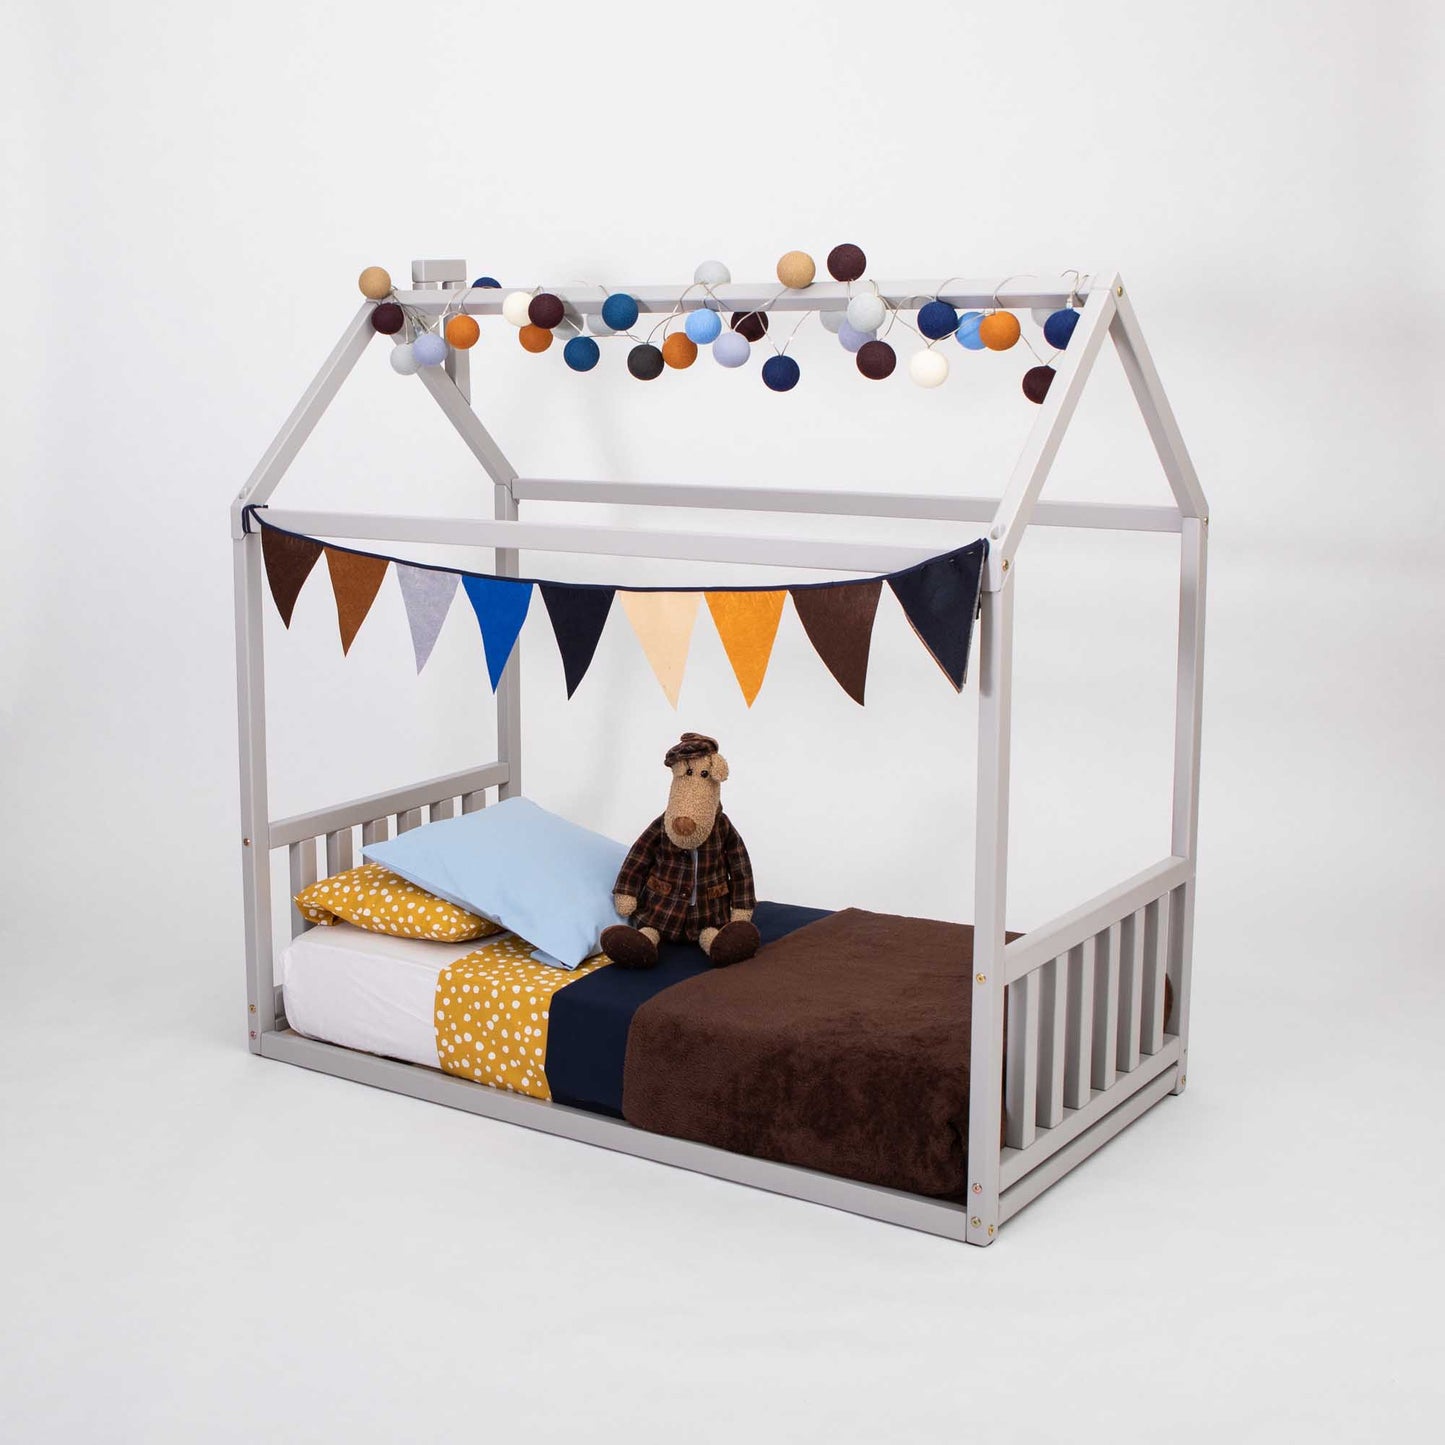 A Sweet Home From Wood toddler house bed with a headboard and footboard, creating a cozy sleep haven adorned with bunting and stuffed animals.